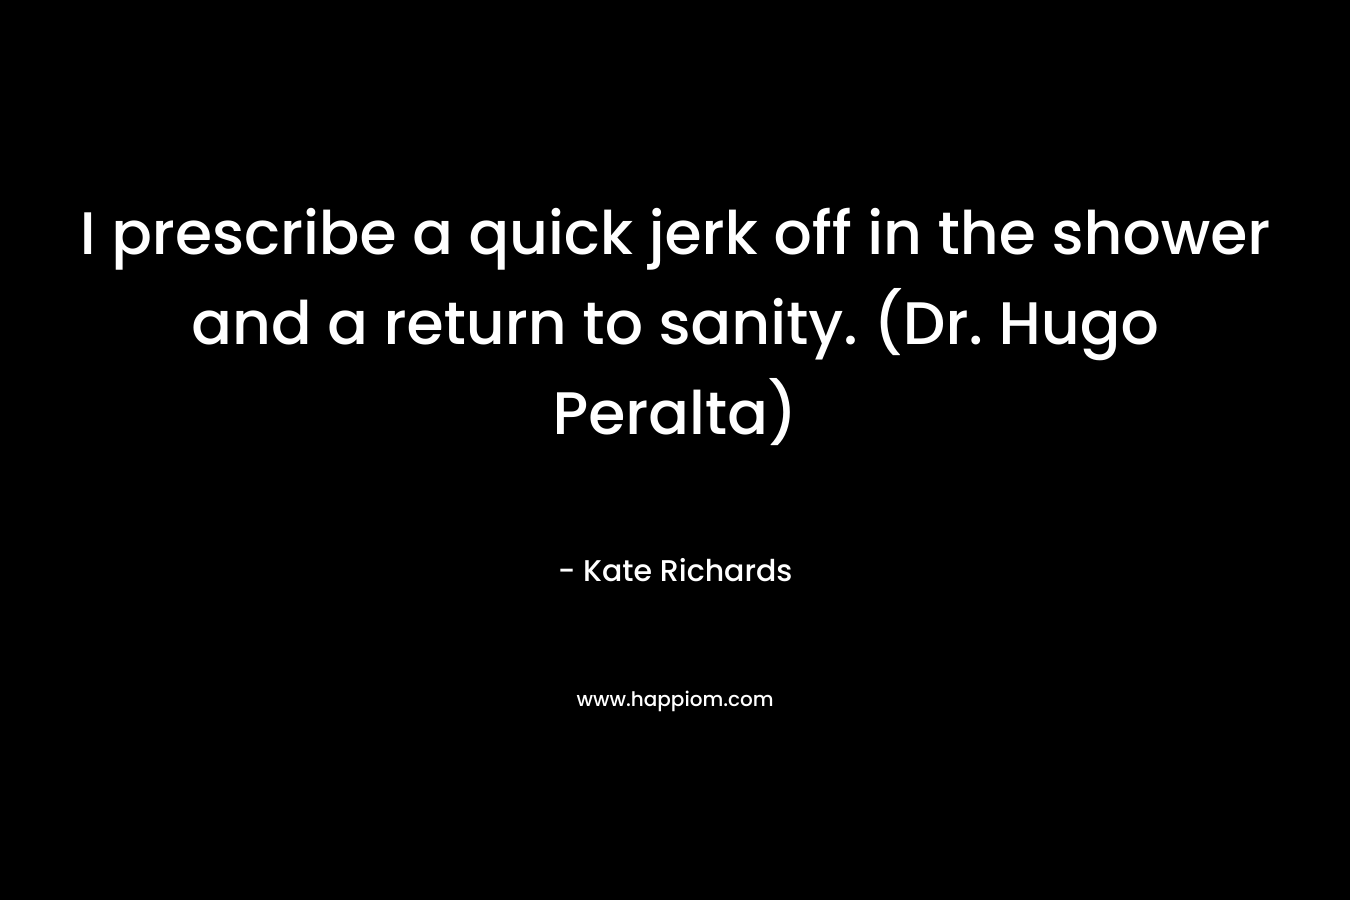 I prescribe a quick jerk off in the shower and a return to sanity. (Dr. Hugo Peralta) – Kate Richards